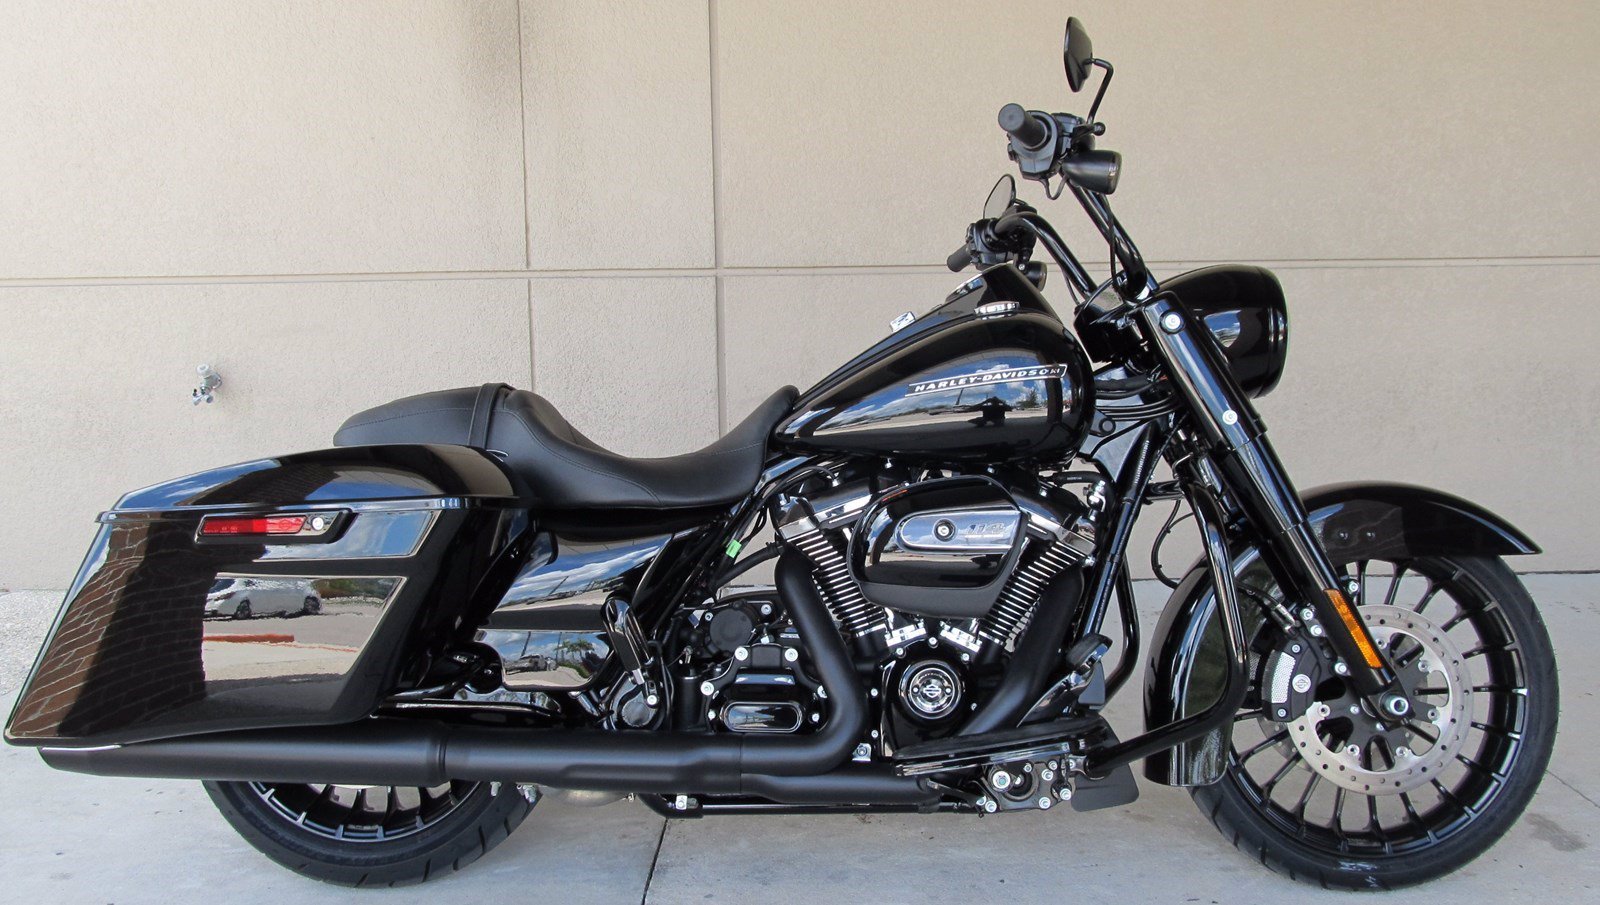 New 2019 Harley Davidson Road King Special FLHRXS Touring 